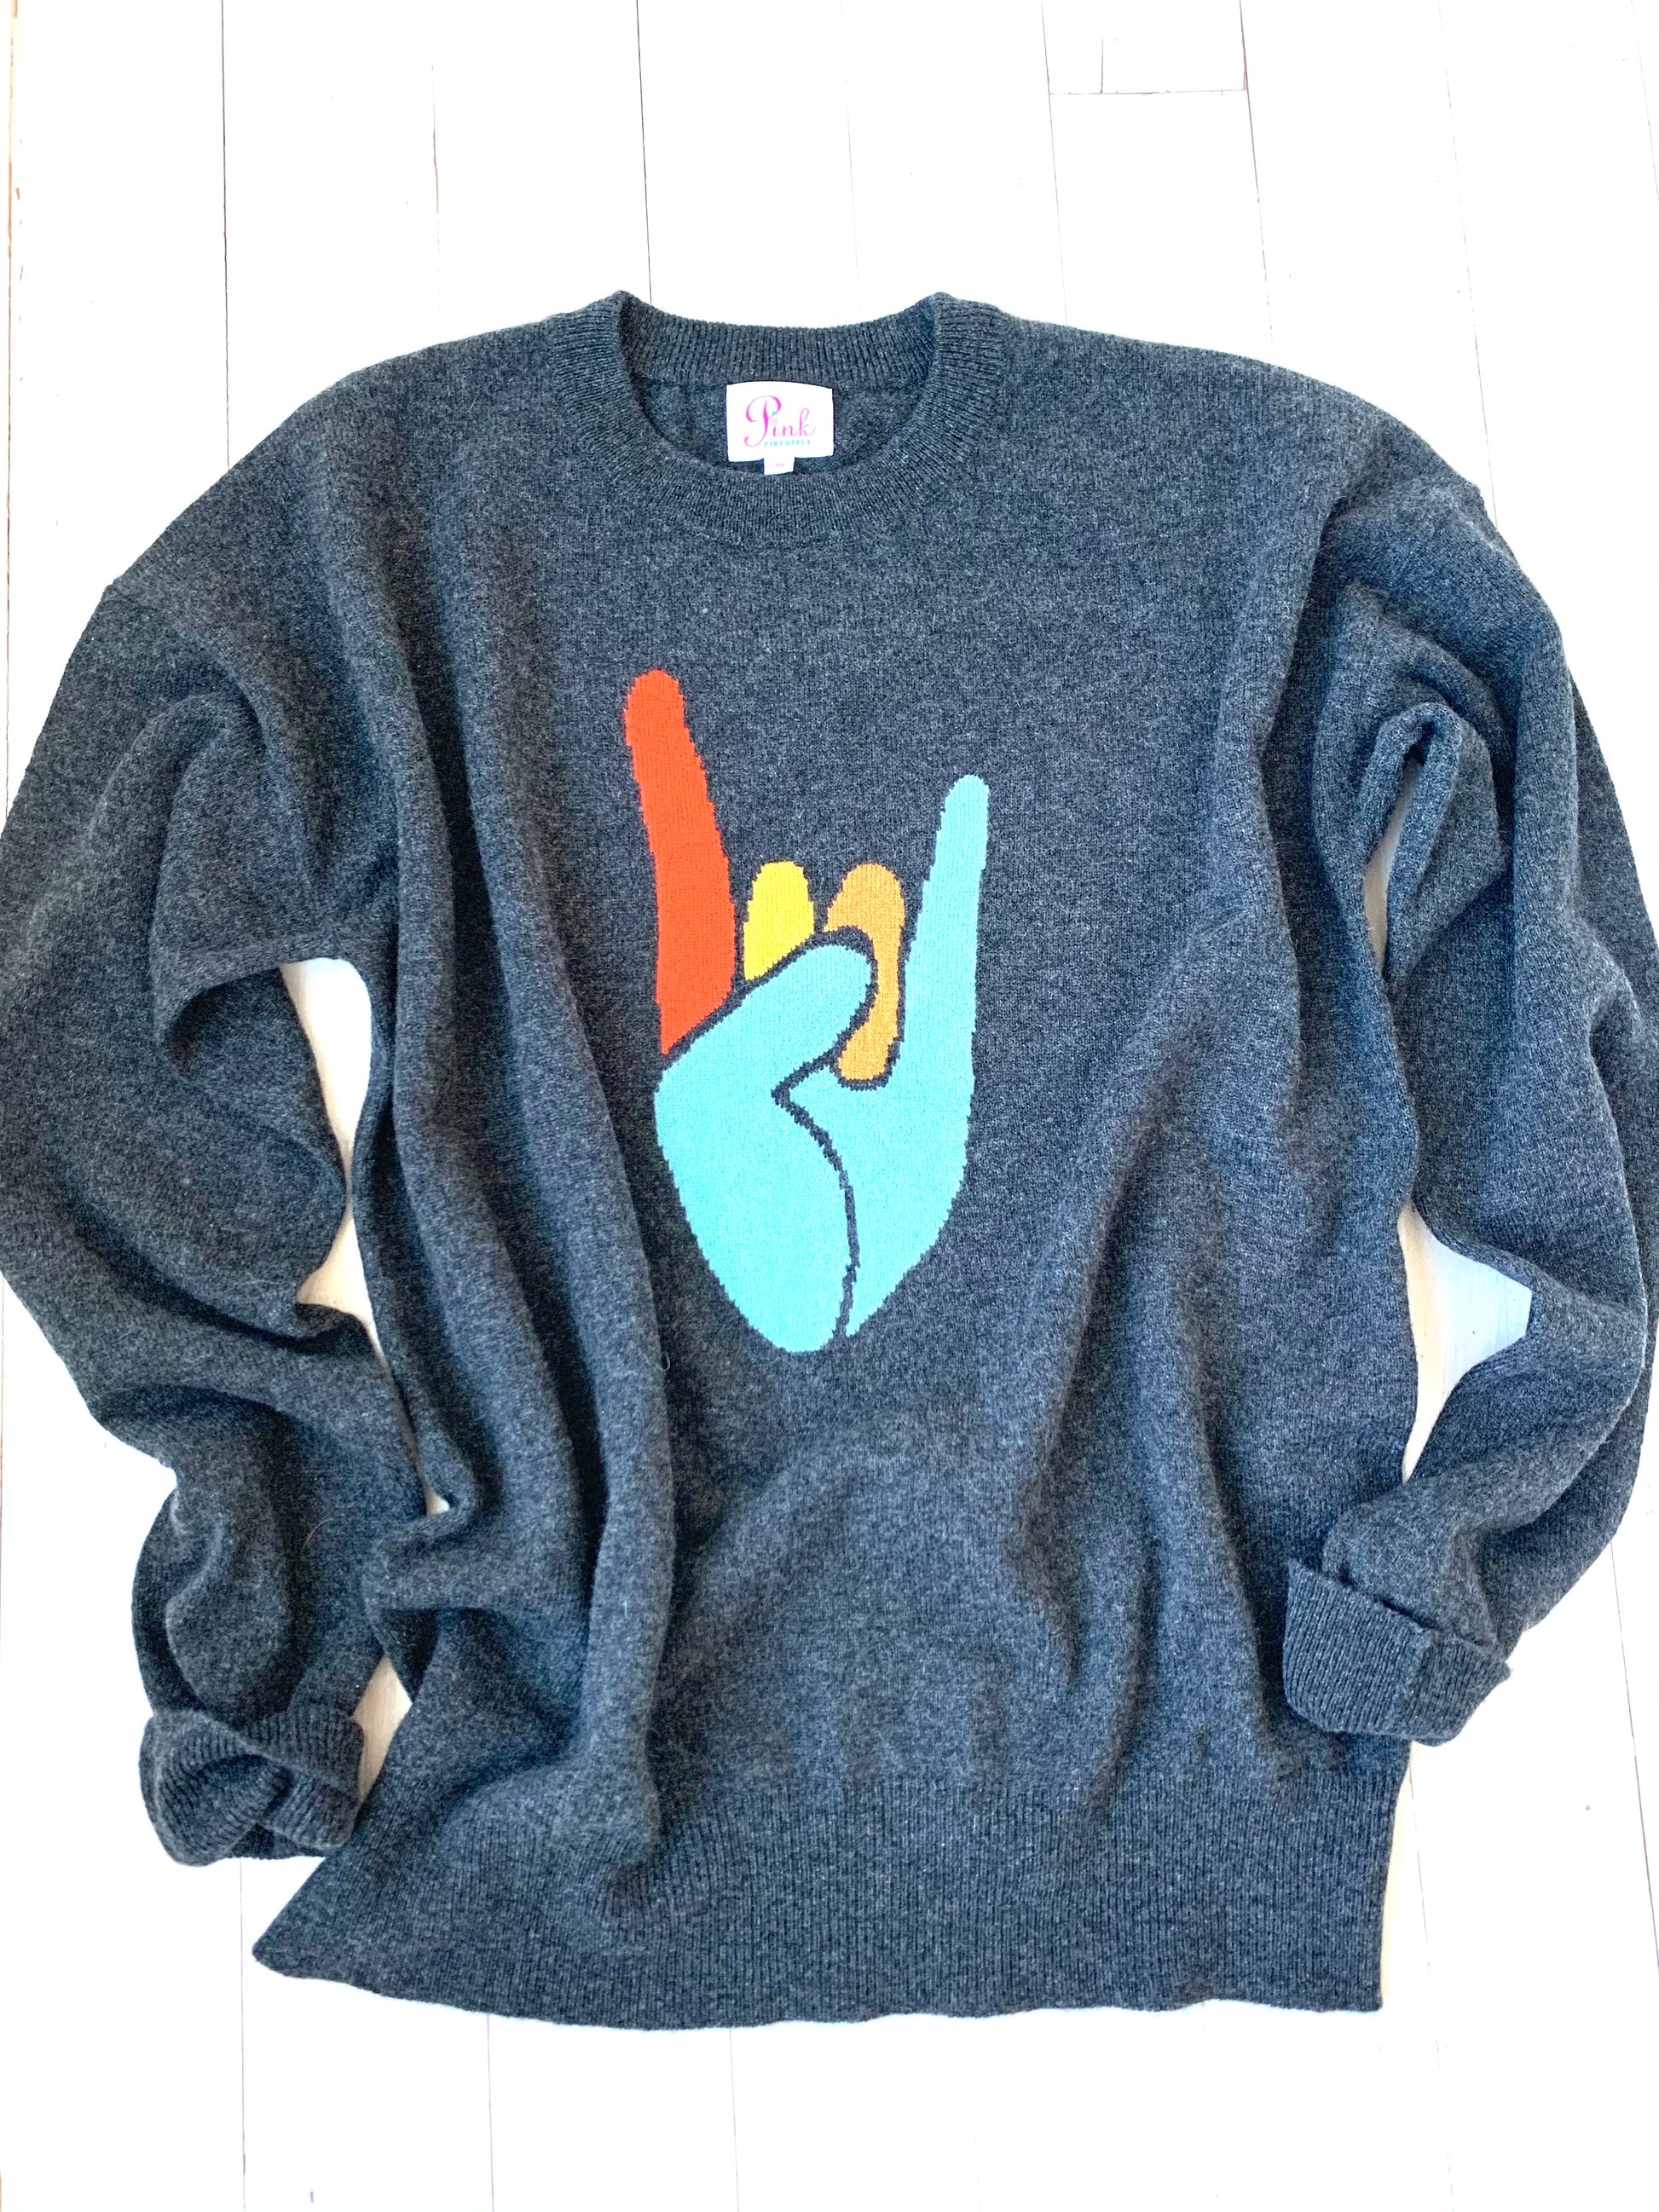 Rock and Roll / Devil sign 100% cashmere